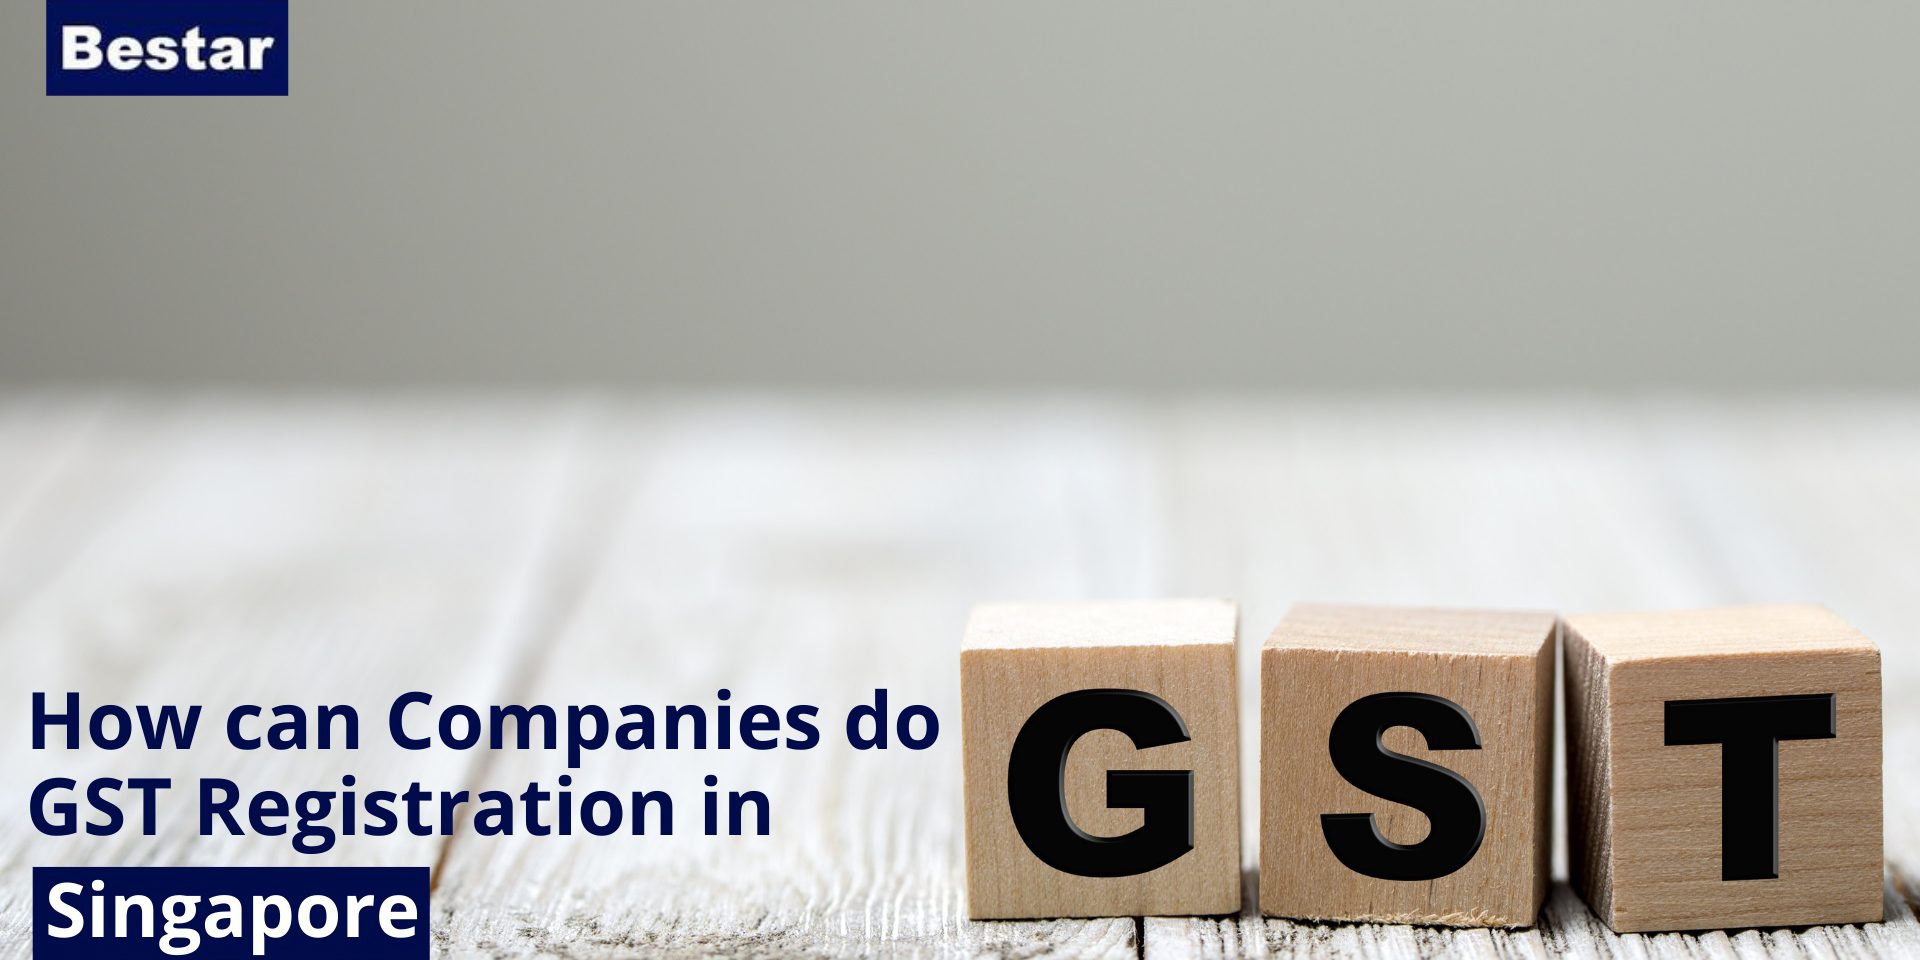 How can Companies do GST Registration in Singapore?